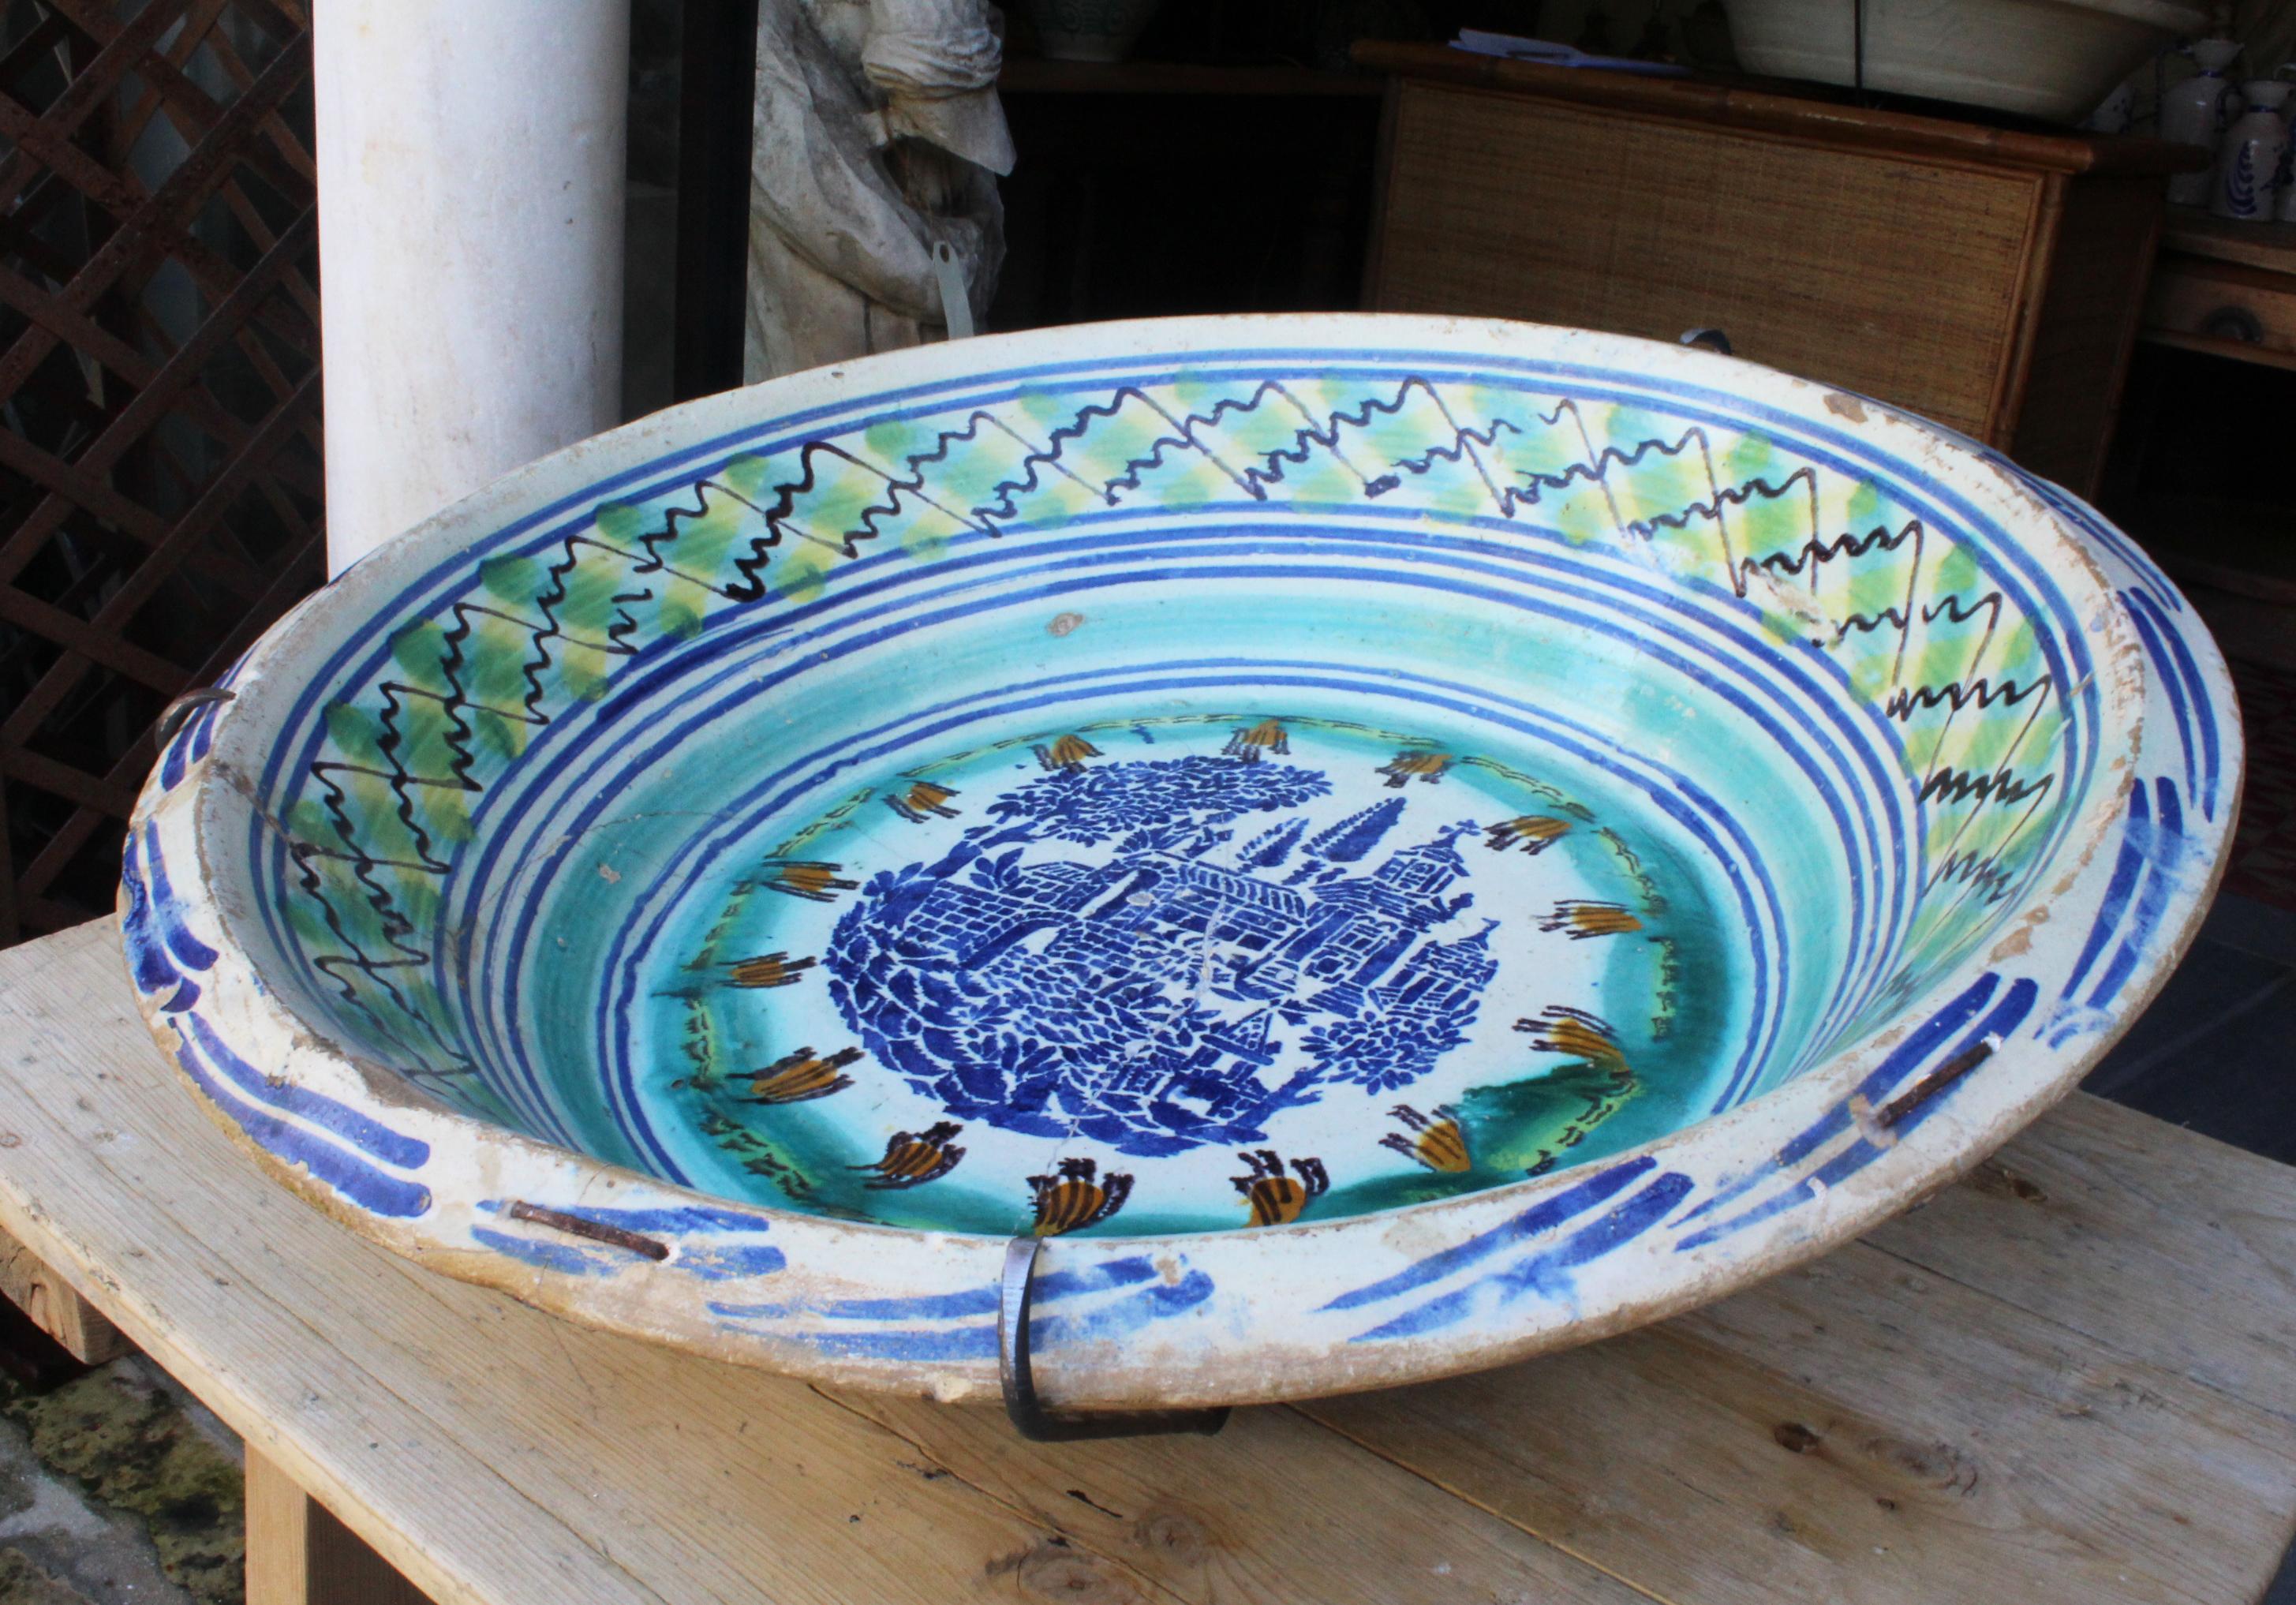 19th century Spanish Triana whit green, blue and yellow glazed terracotta plate.

Triana is a style that originates in Seville, known for its mix of Christian and Al-Andalus cultures.

With escenes of a town and trees in the middle and geometric